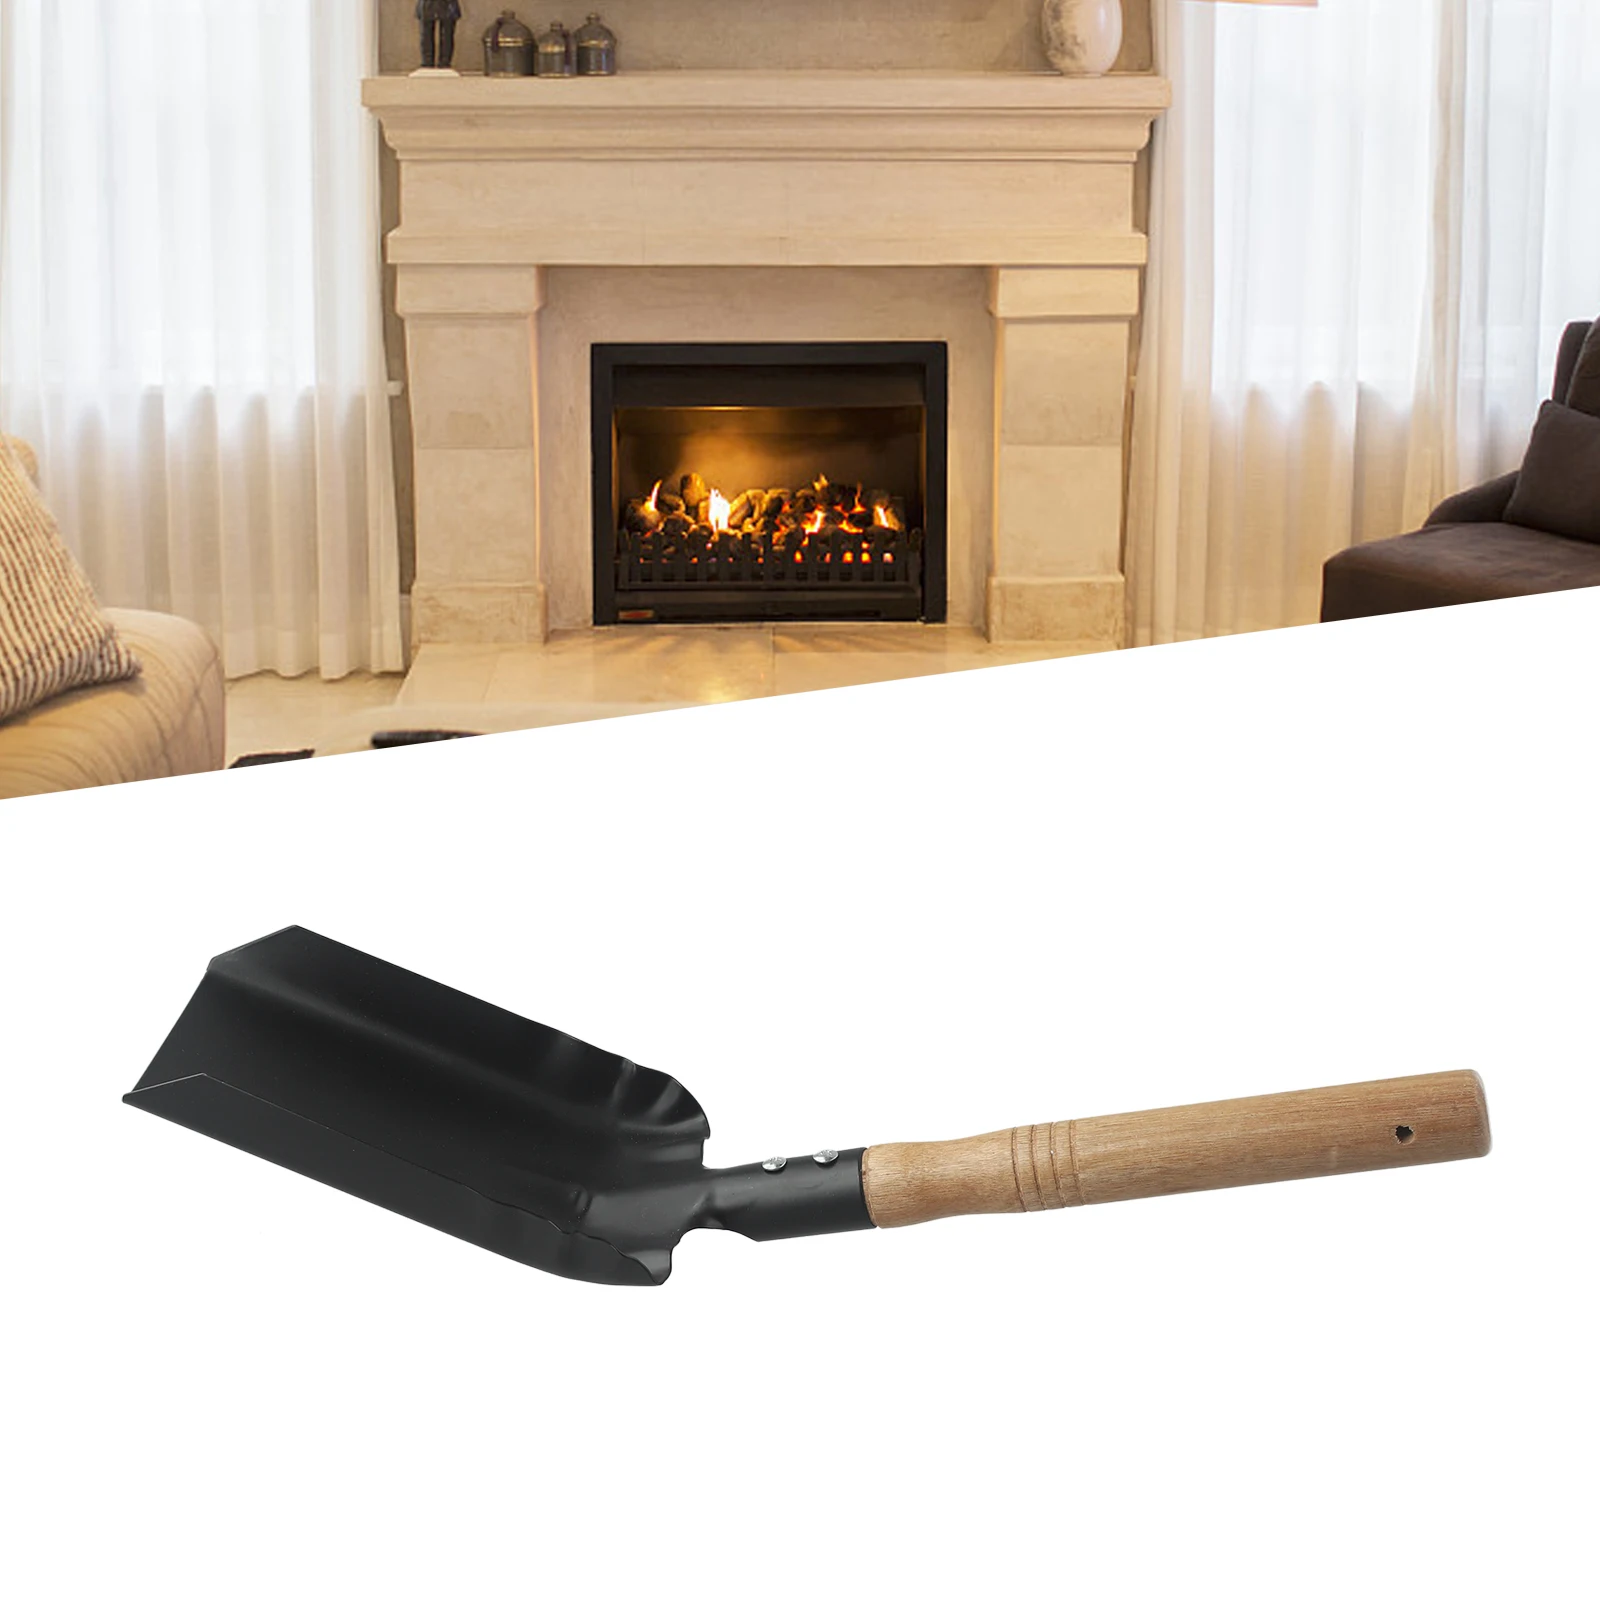 

Household Commodity Parts Indoor Chimney Shovel Ash Shovel 40 Cm Fireplace Cleaning Iron Material Oven For Cleaning A Fireplaces